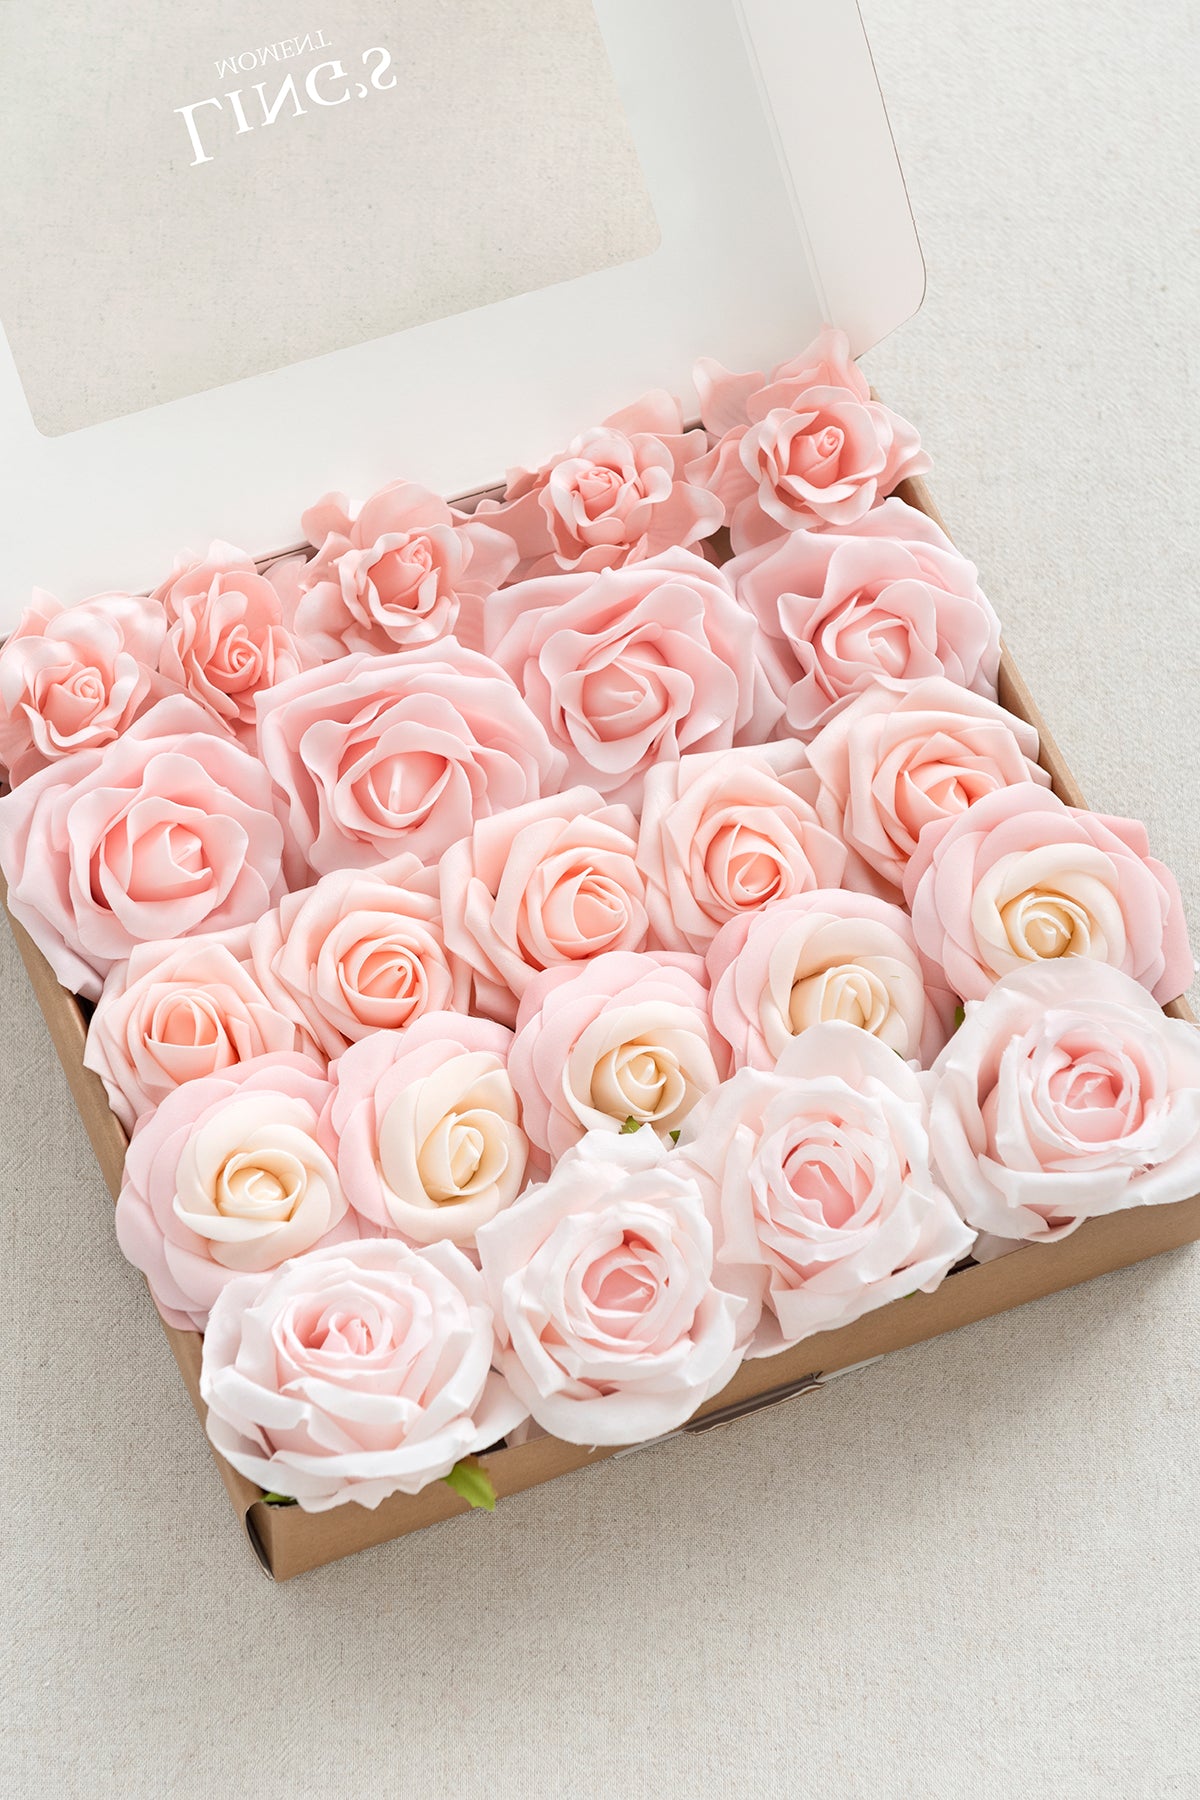 DIY Supporting Flower Boxes in Blush & Cream